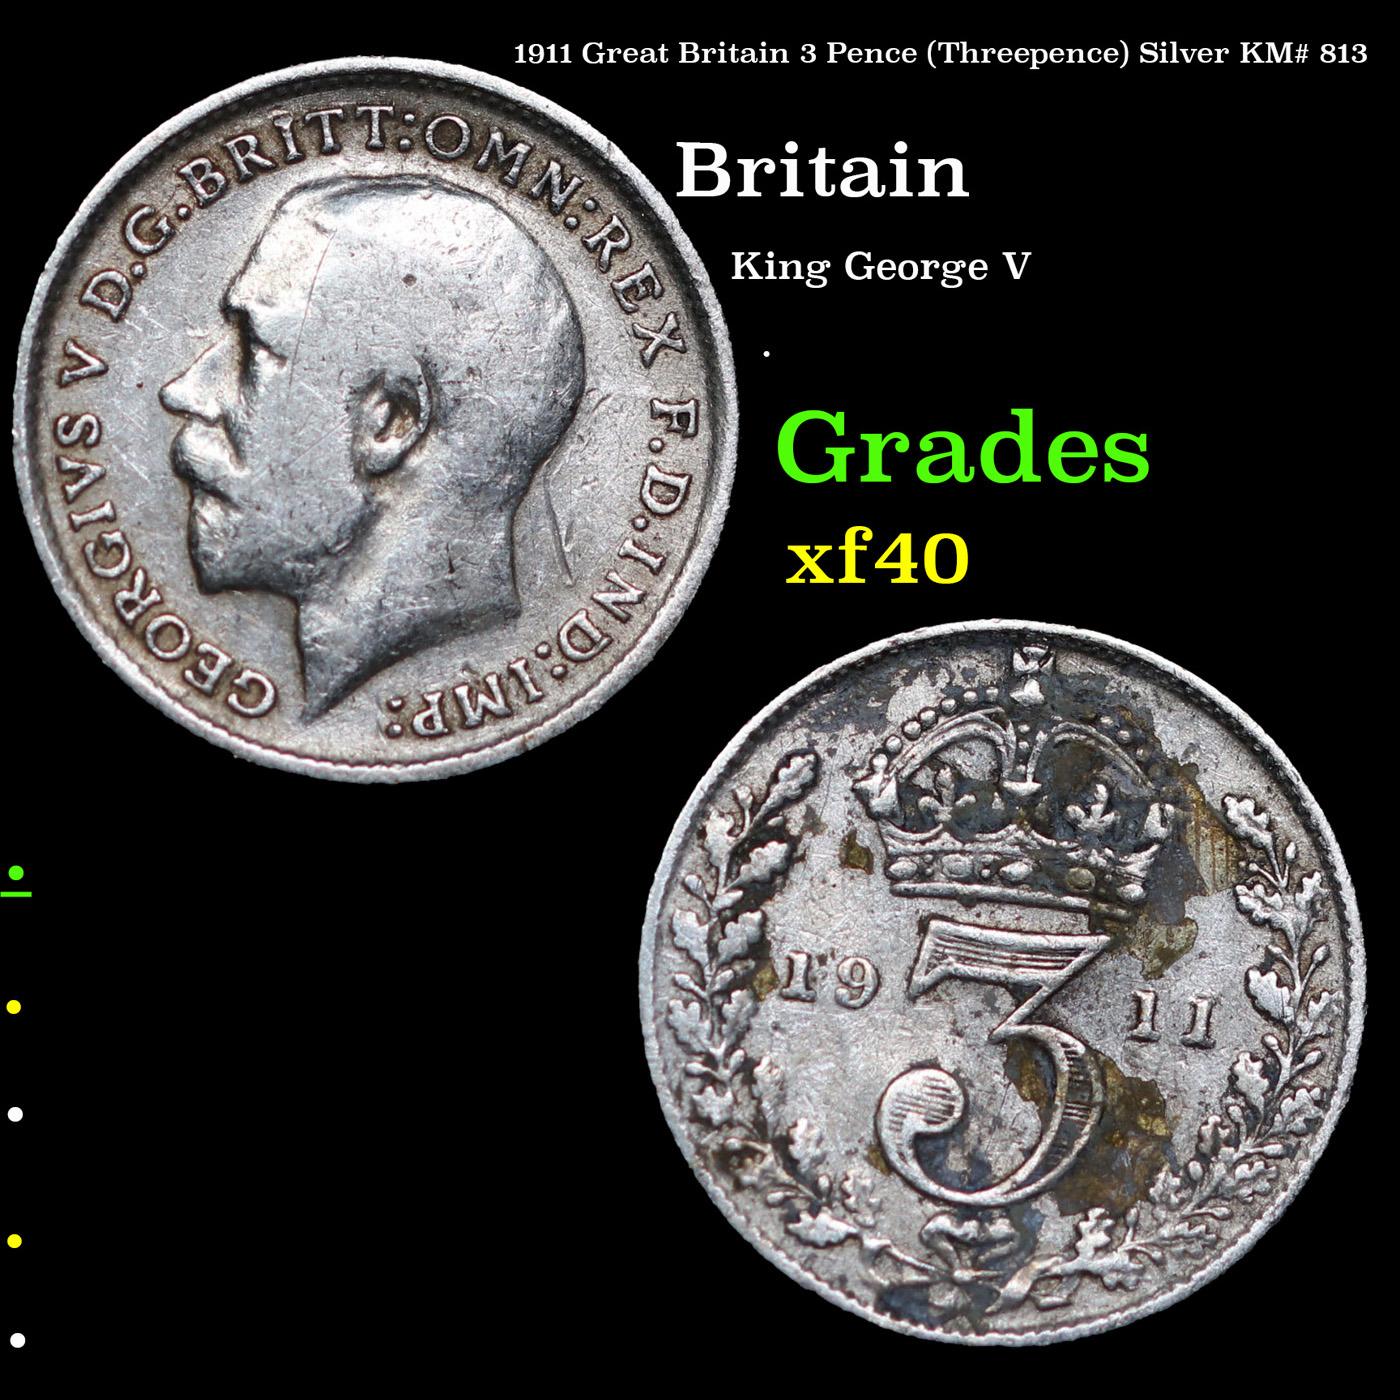 1911 Great Britain 3 Pence (Threepence) Silver KM# 813 Grades xf